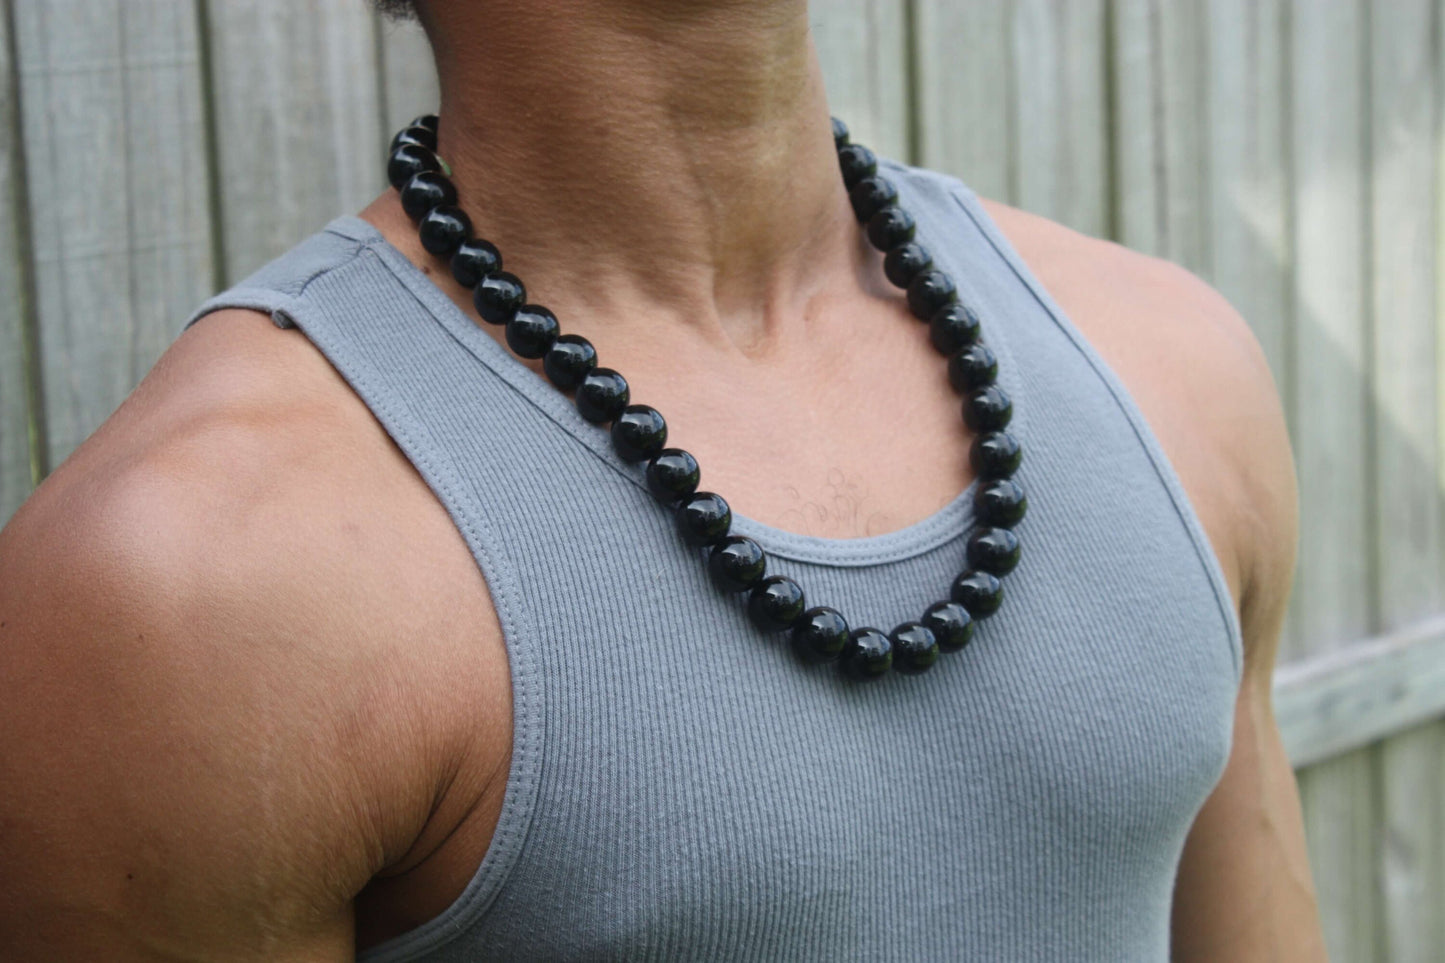 16mm Black Onyx Necklace - EMF Protection Jewelry - Empath Protection - Necklaces for Women/Men - Protection Stones with Magnetic clasp